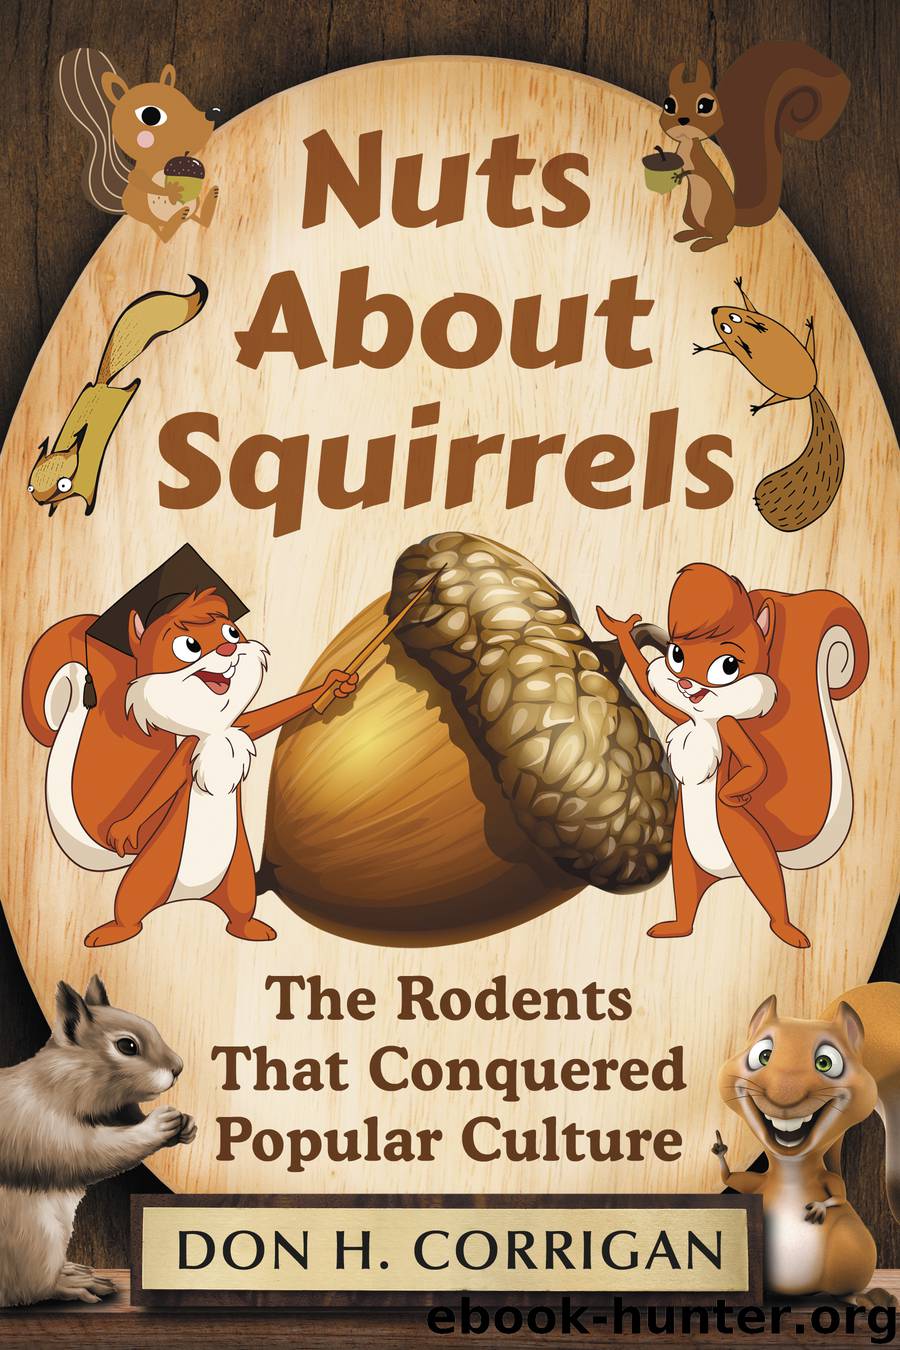 Nuts About Squirrels by Don H. Corrigan